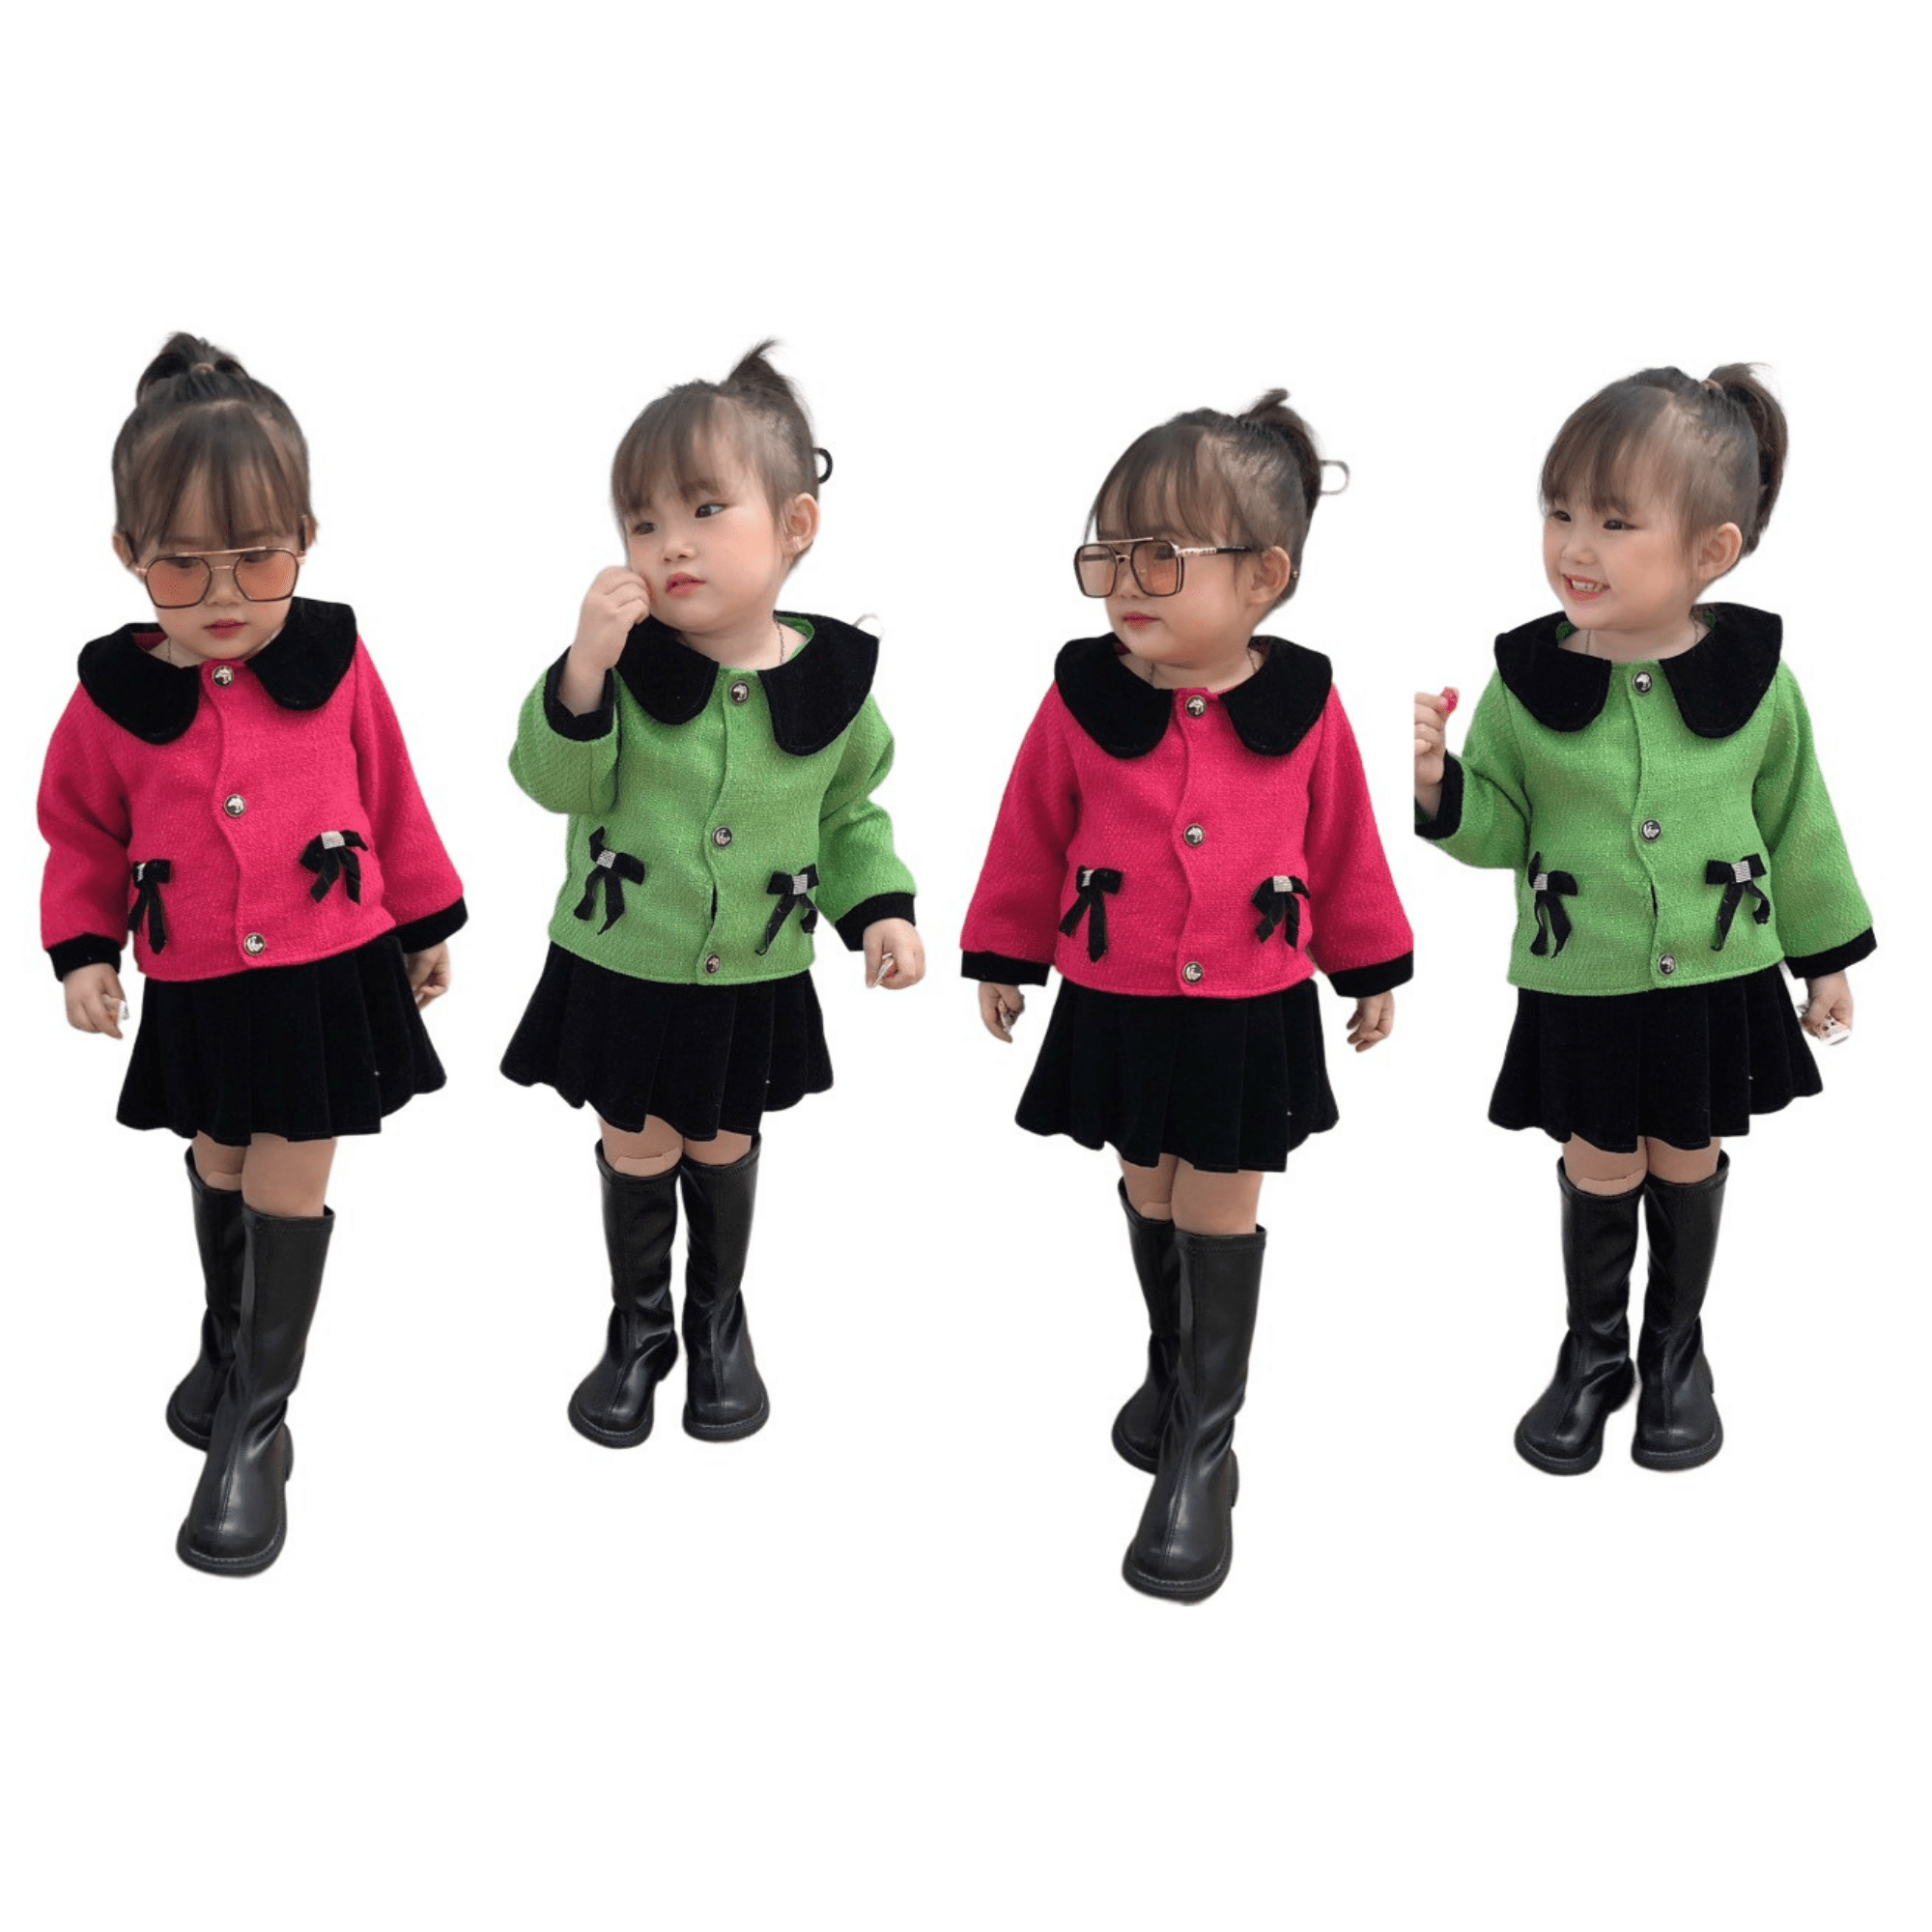 Kids Designers Clothes Comfortable 100% Wool Dresses New Fashion Each One In Opp Bag From Vietnam Manufacturer 4